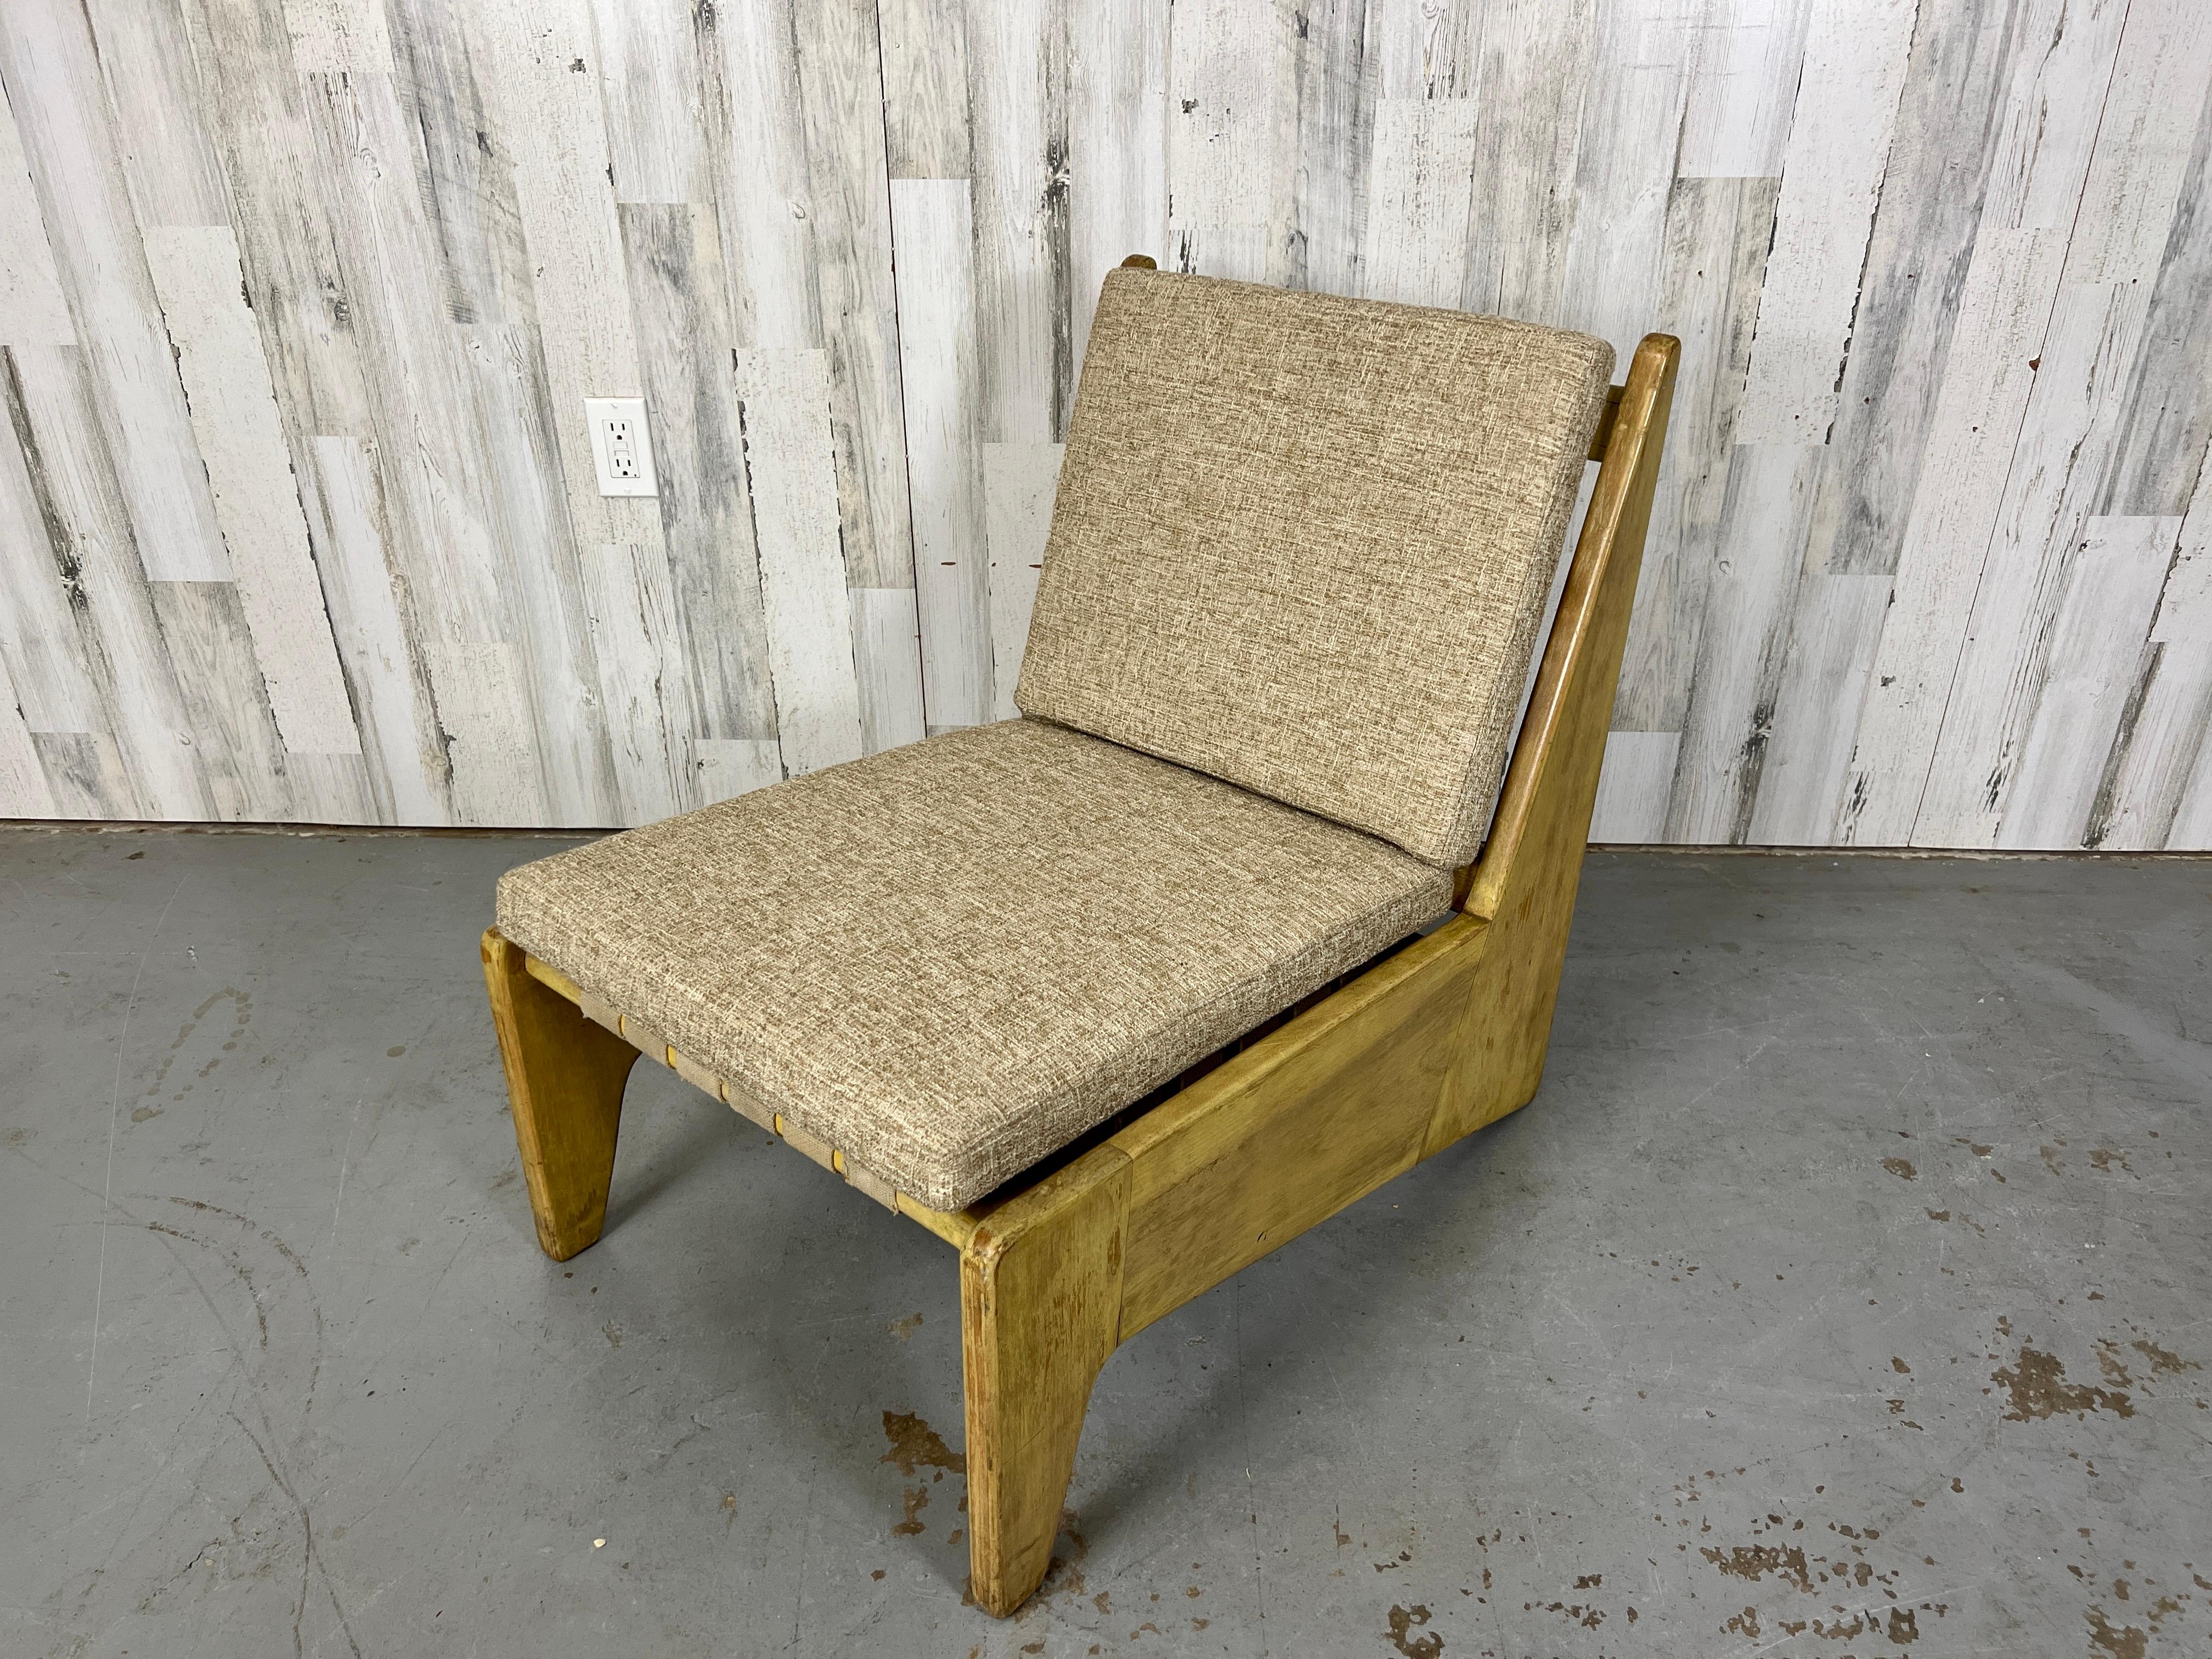 Architectural Modernist Lounge Chair In Fair Condition For Sale In Denton, TX